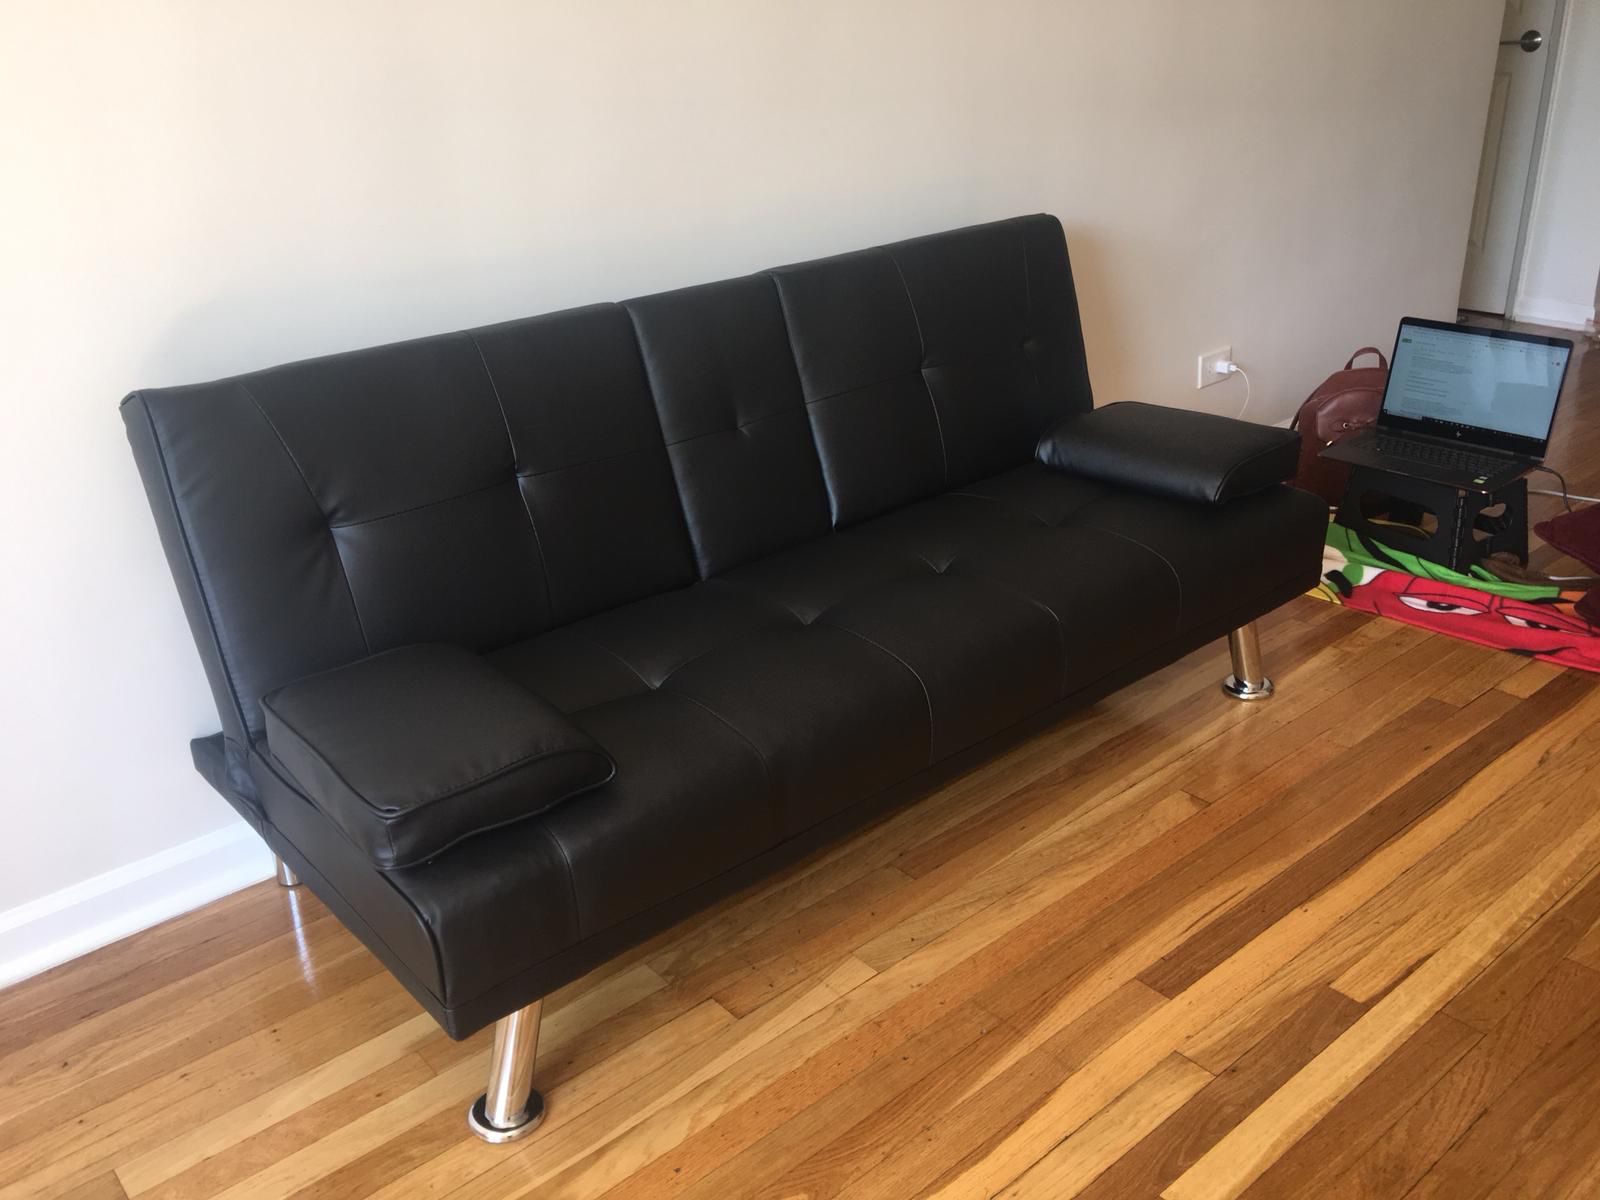 Brand new leather futon (wrong order)